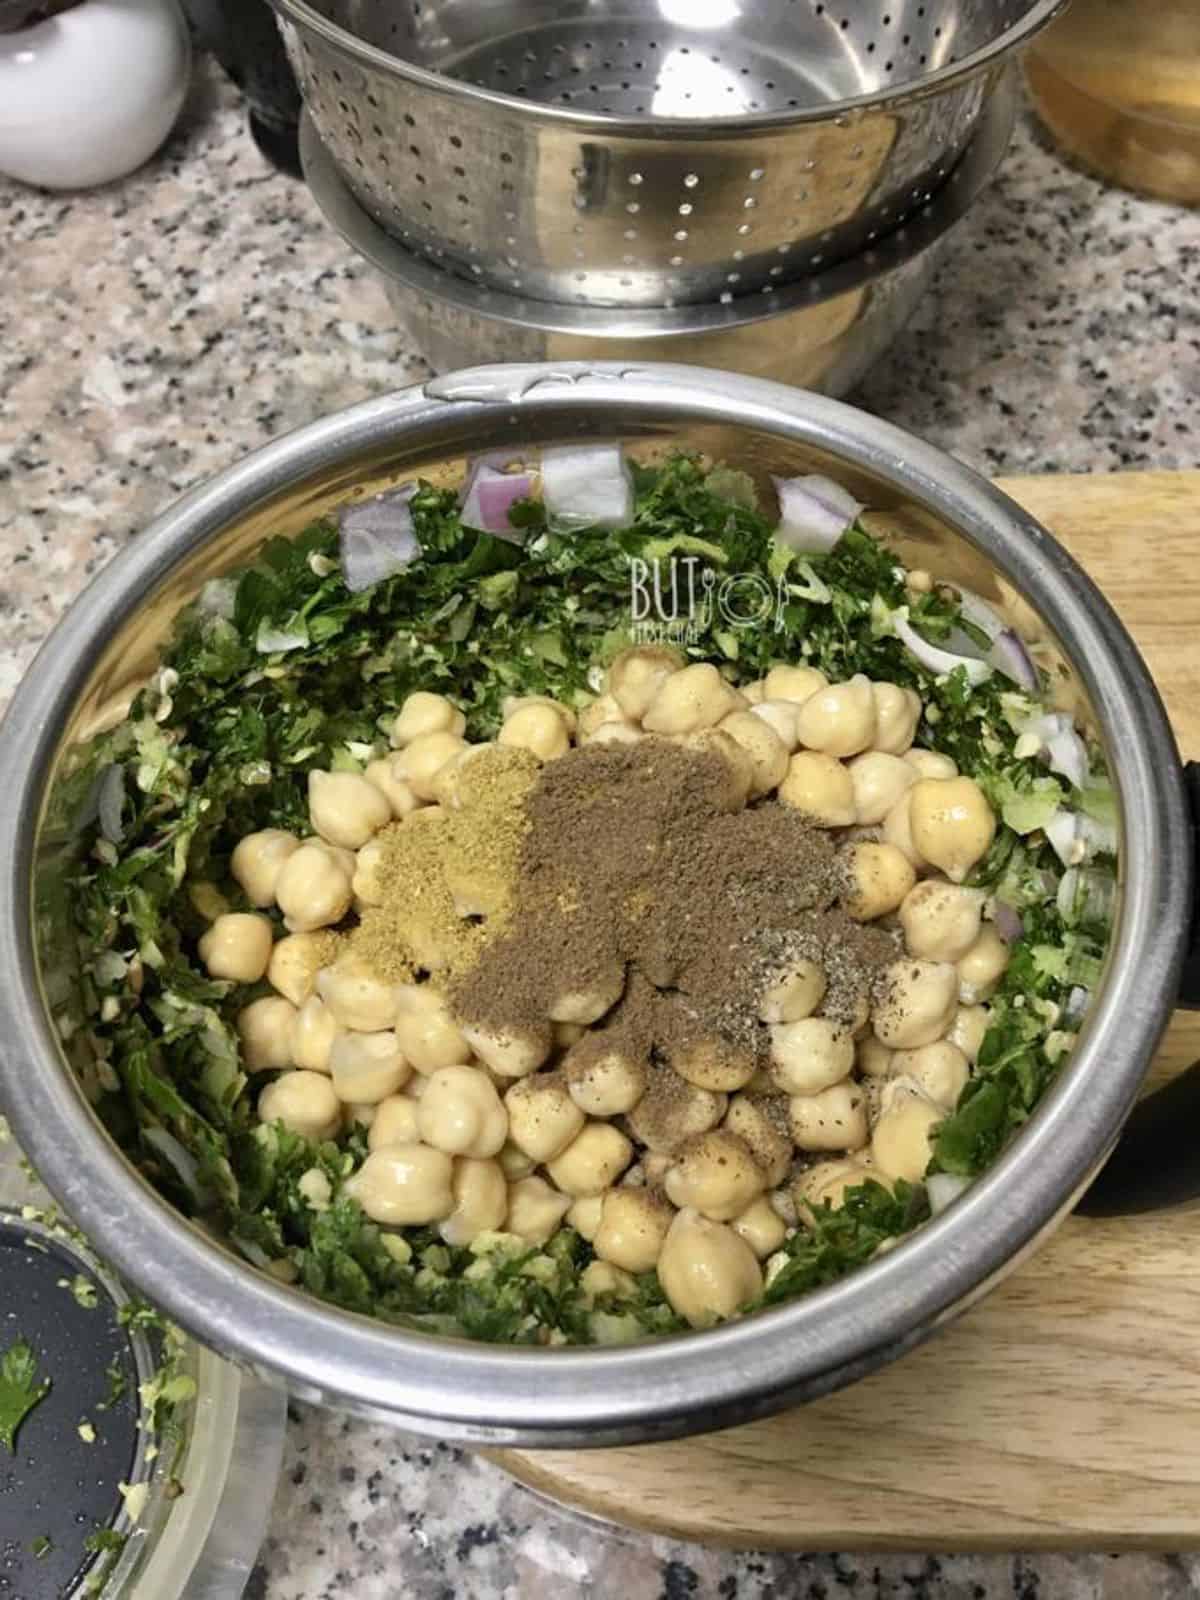 processing fresh herbs and spices with dried soaked chickpeas.